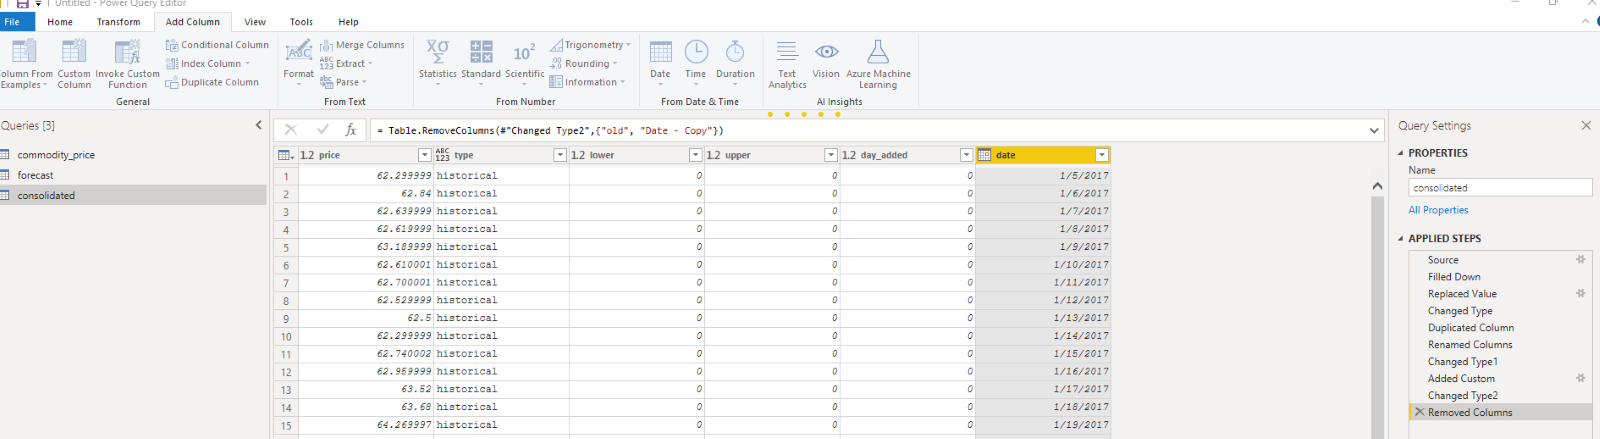 Consolidating the "forecast" table using Power Query